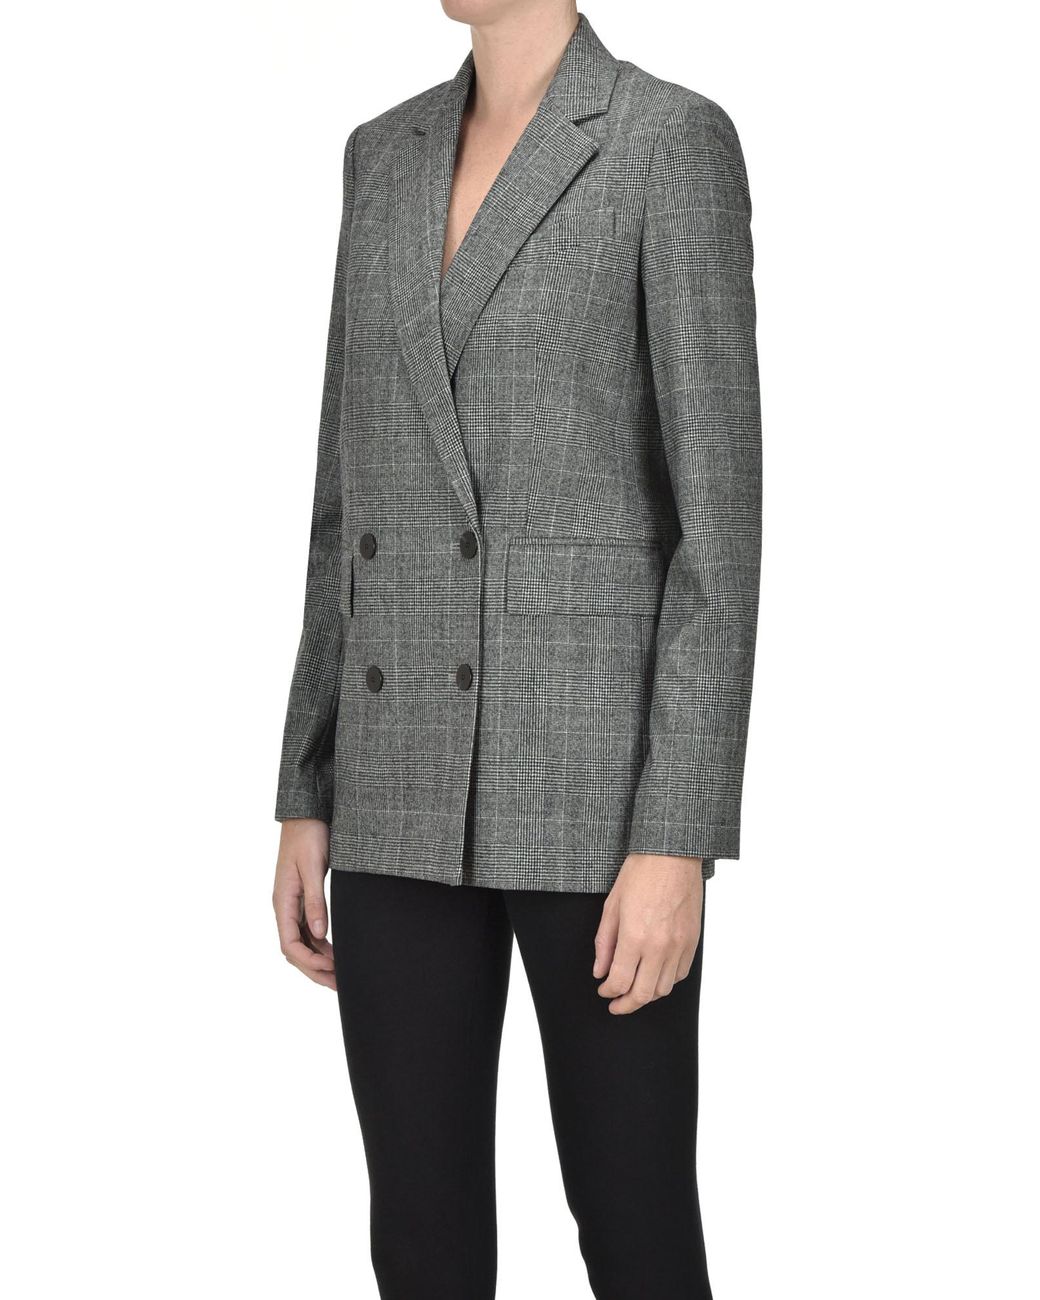 Louis Vuitton Double-Breasted Prince of Wales Blazer